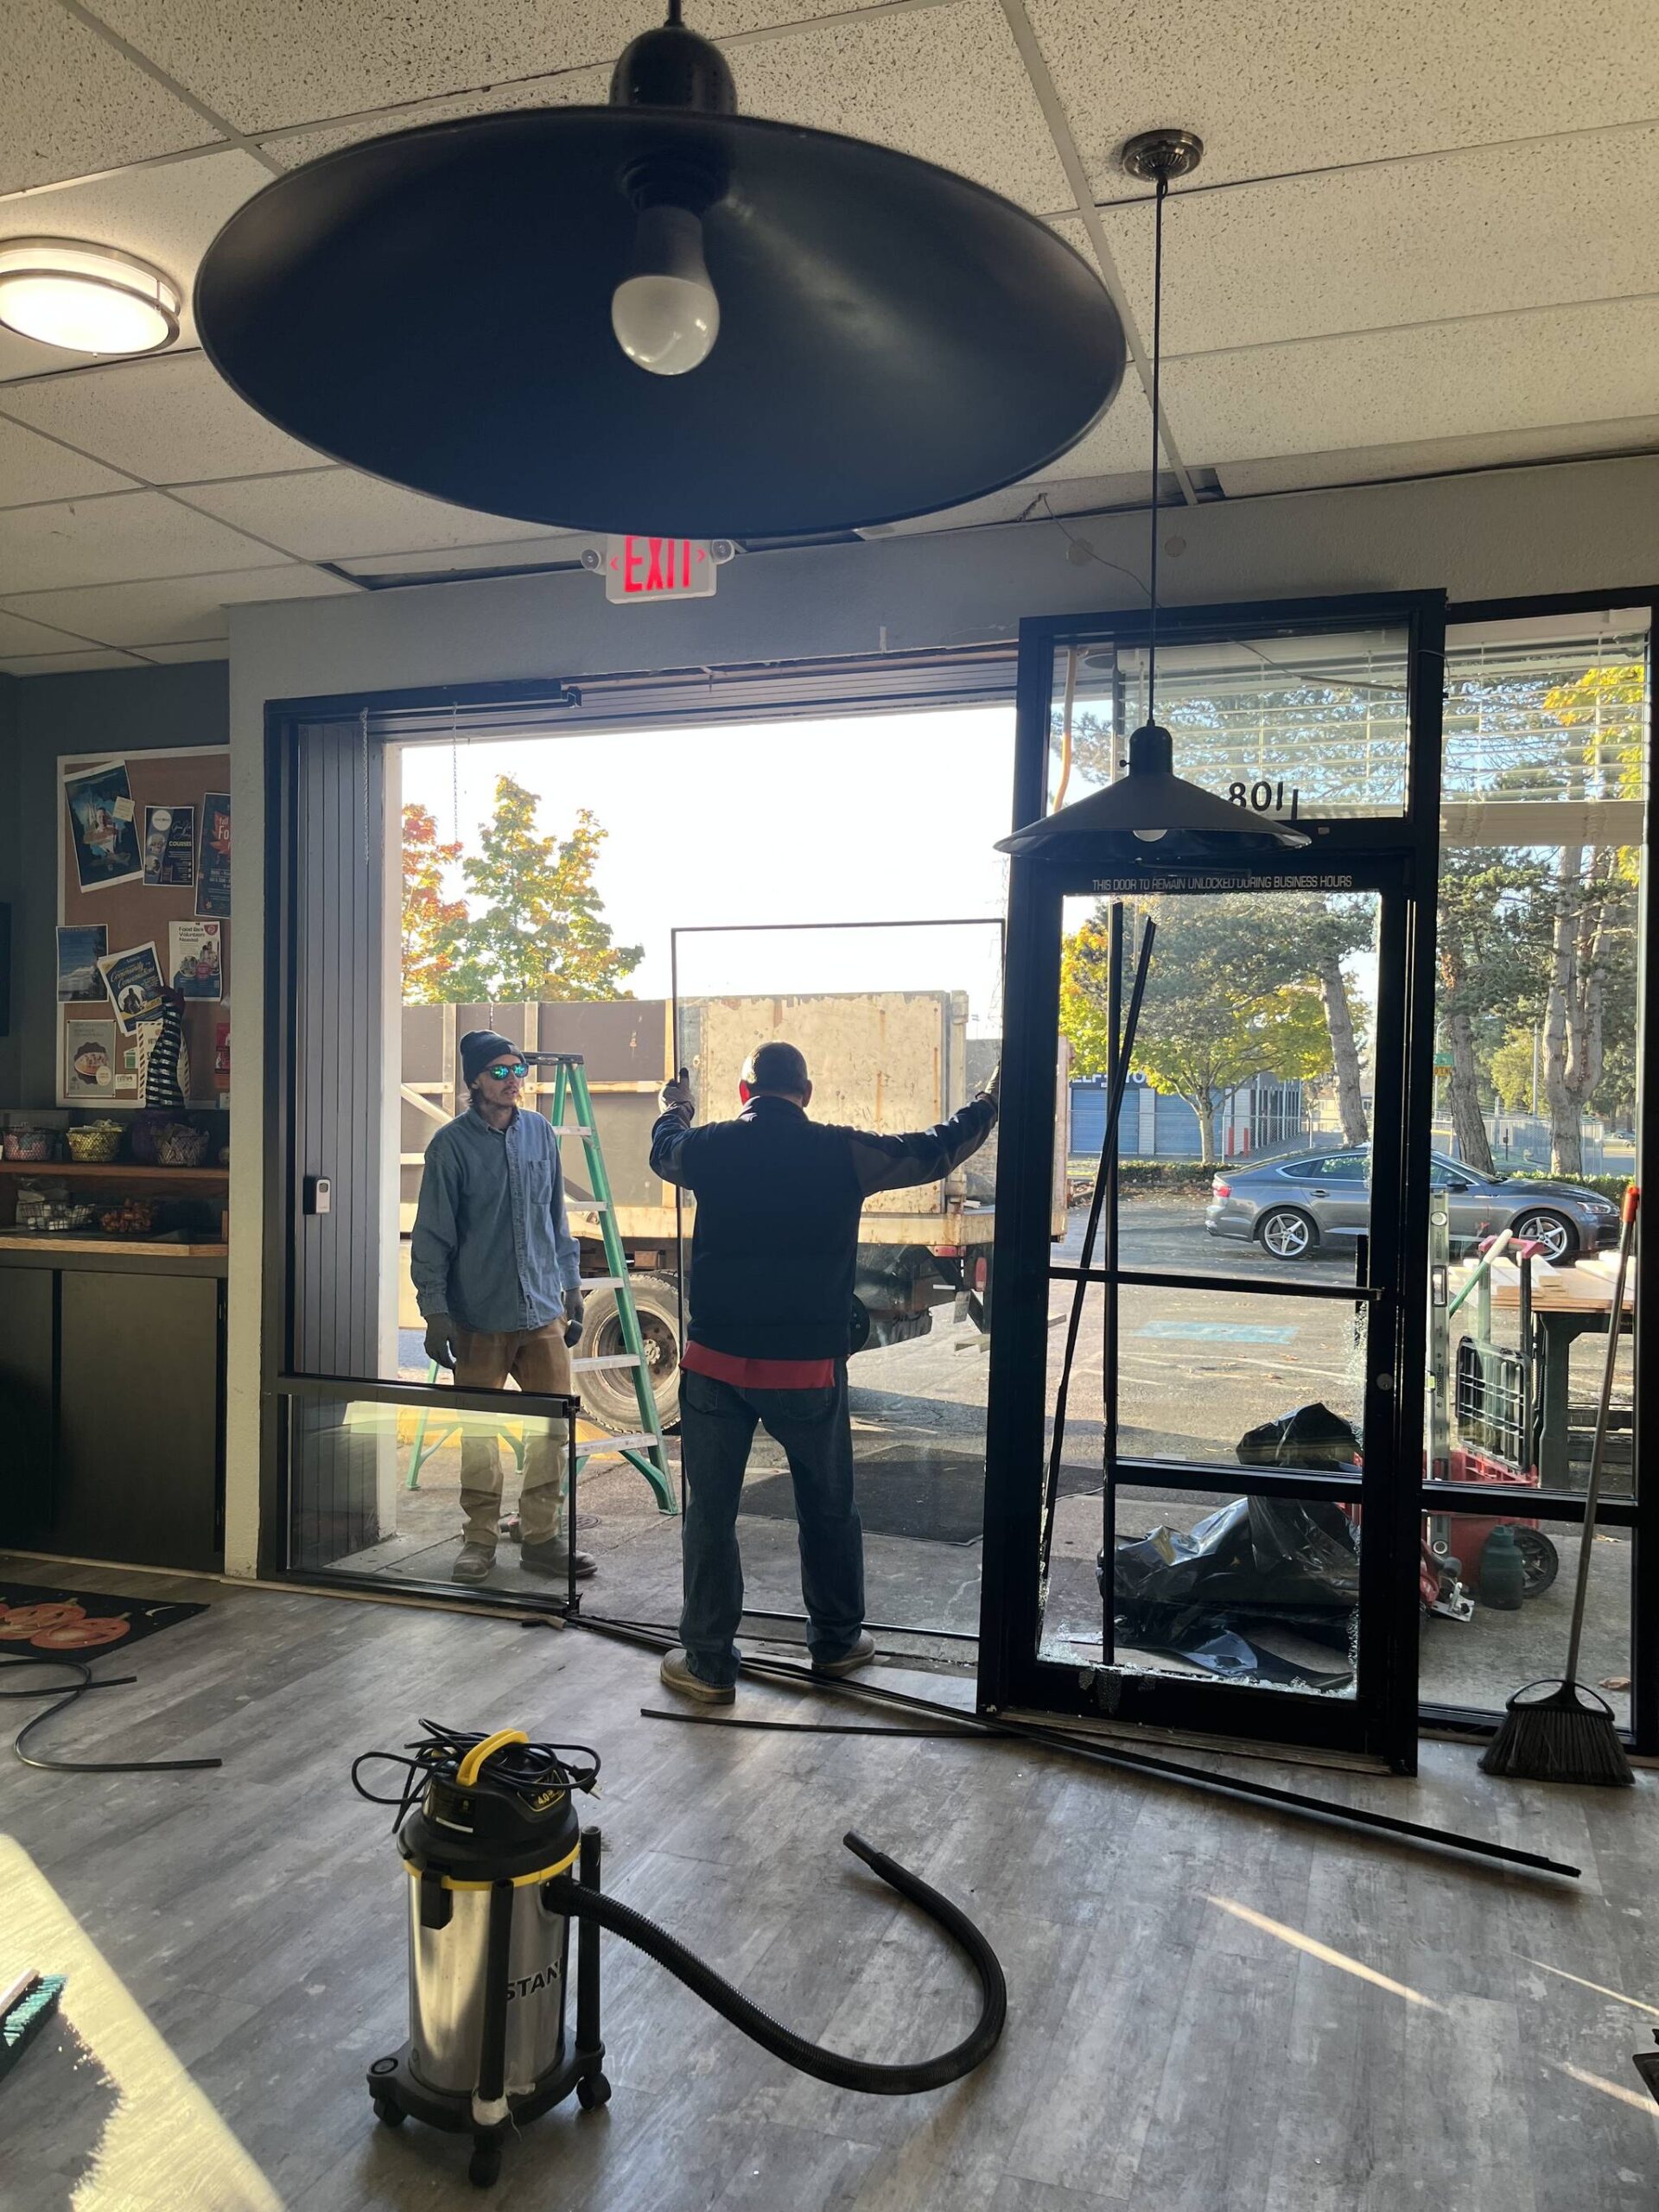 Contractors worked to create a temporary storefront in order to allow the business to reopen as quickly as possible. Photo provided by FUSION.